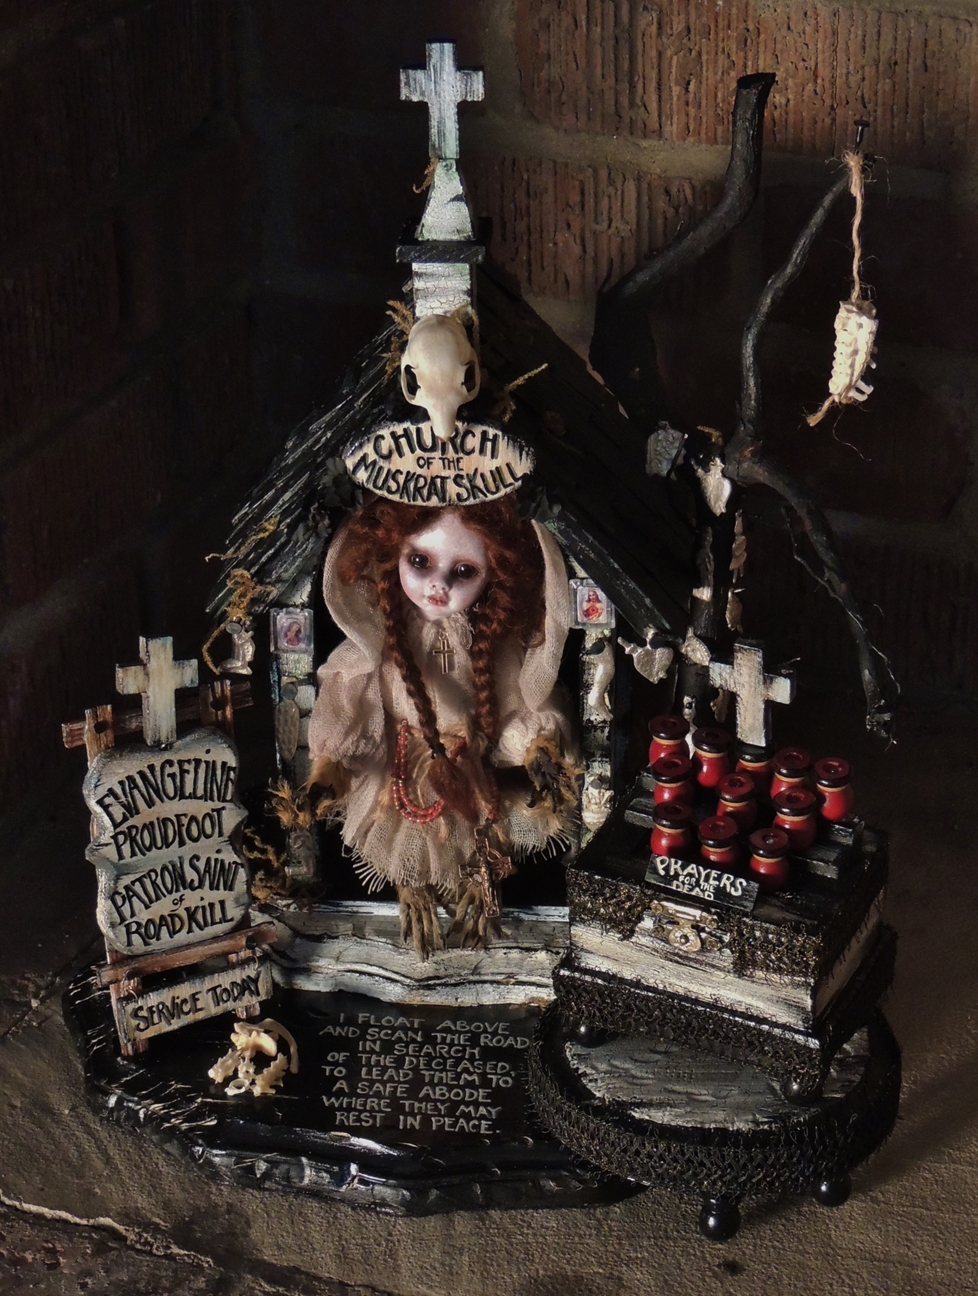 miniature mixed media taxidery assemblage of an altarpiece doll representing the Patron Saint of Roadkill